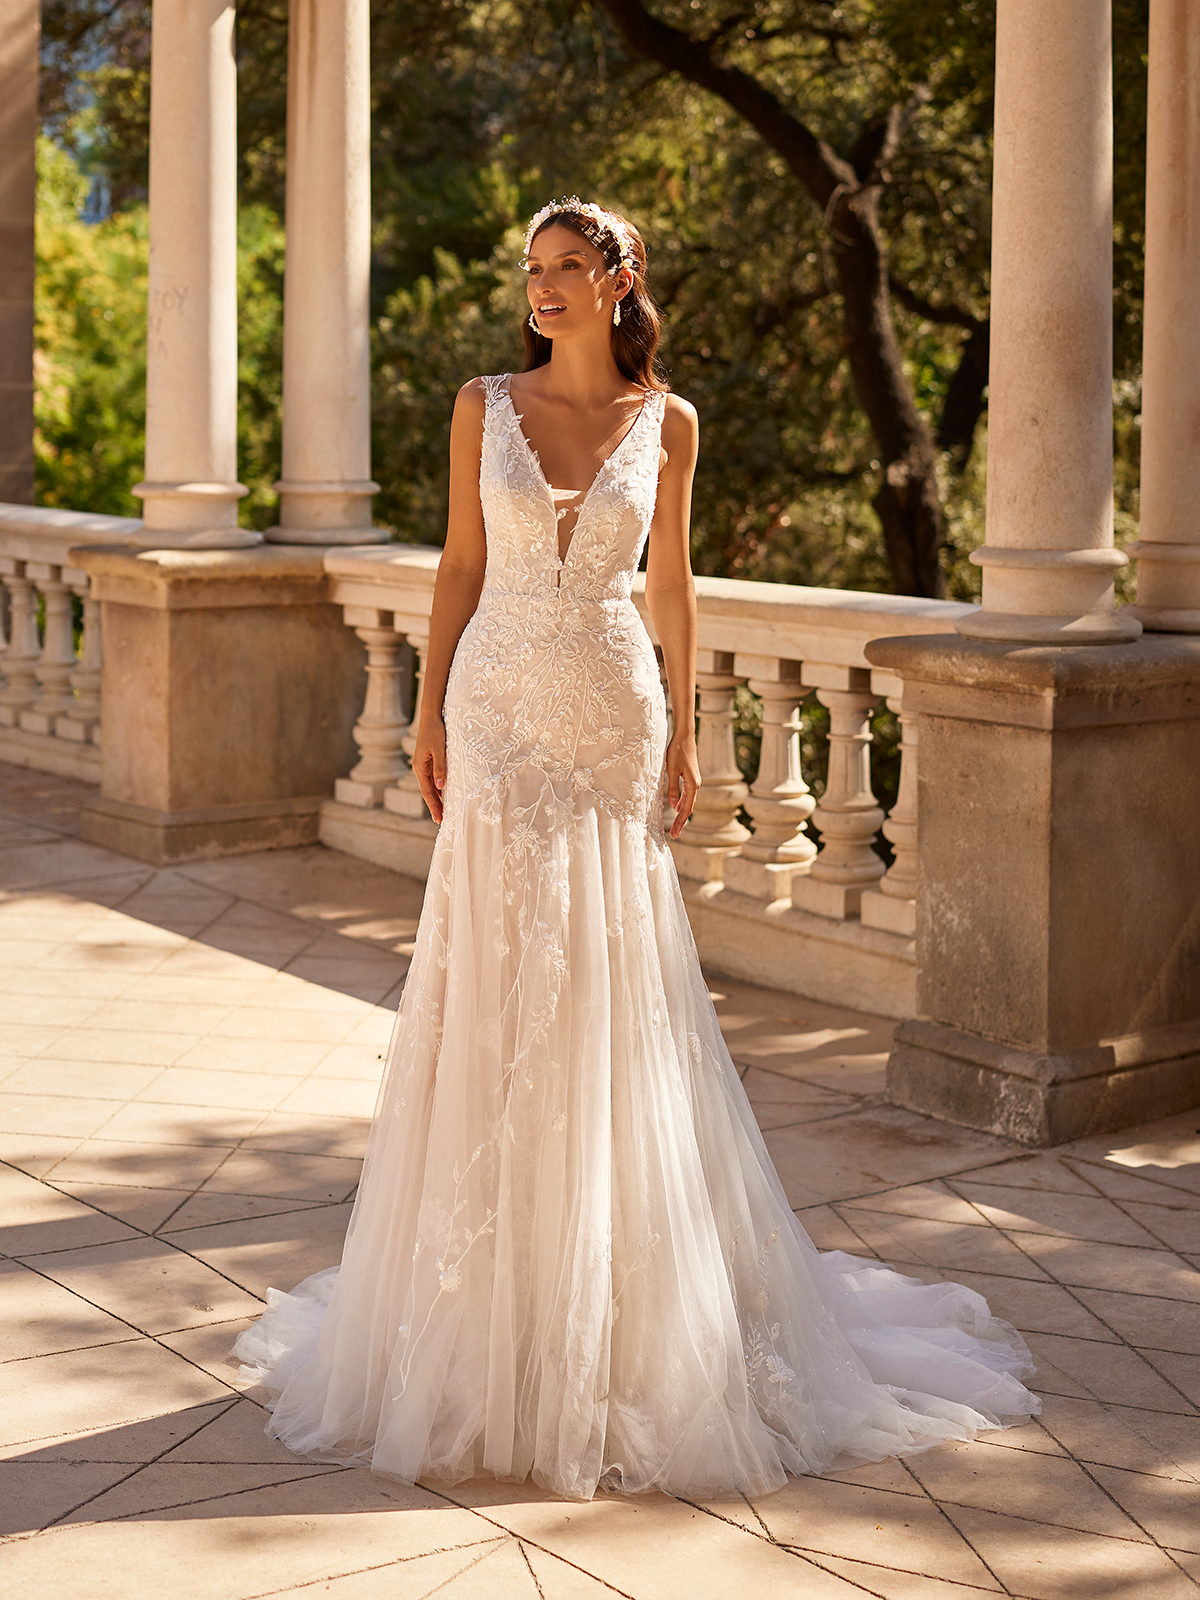 Tips For Choosing the Perfect Wedding Dress - Style Vanity